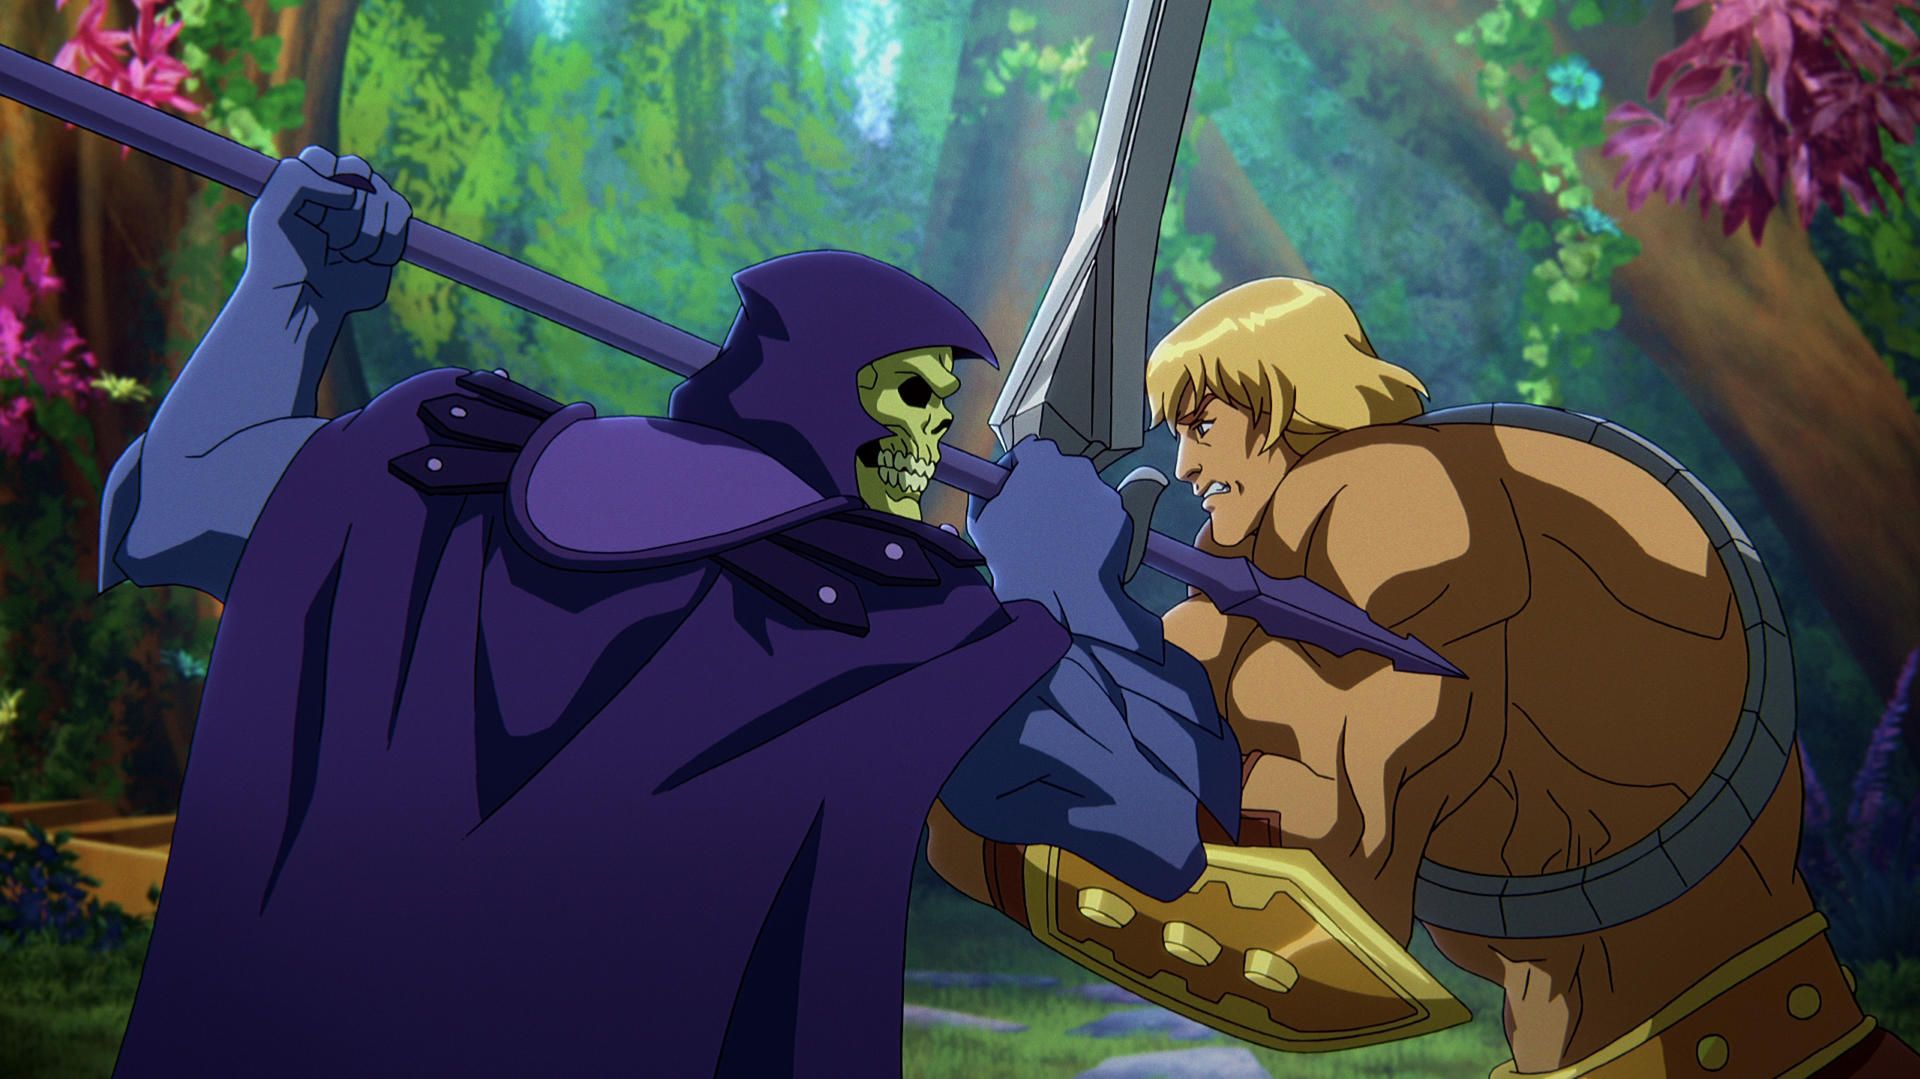 In a CG animated still from Masters of the Universe: Revelation, Skeletor (left), who wears a purple cloak and hood over his skull, grips his spear in a battle against He-Man (right), a strong shirtless blonde male with a golden armored belt and wrist plates holding a silver sword. The two are standing face to face in a forest with bright foliage.